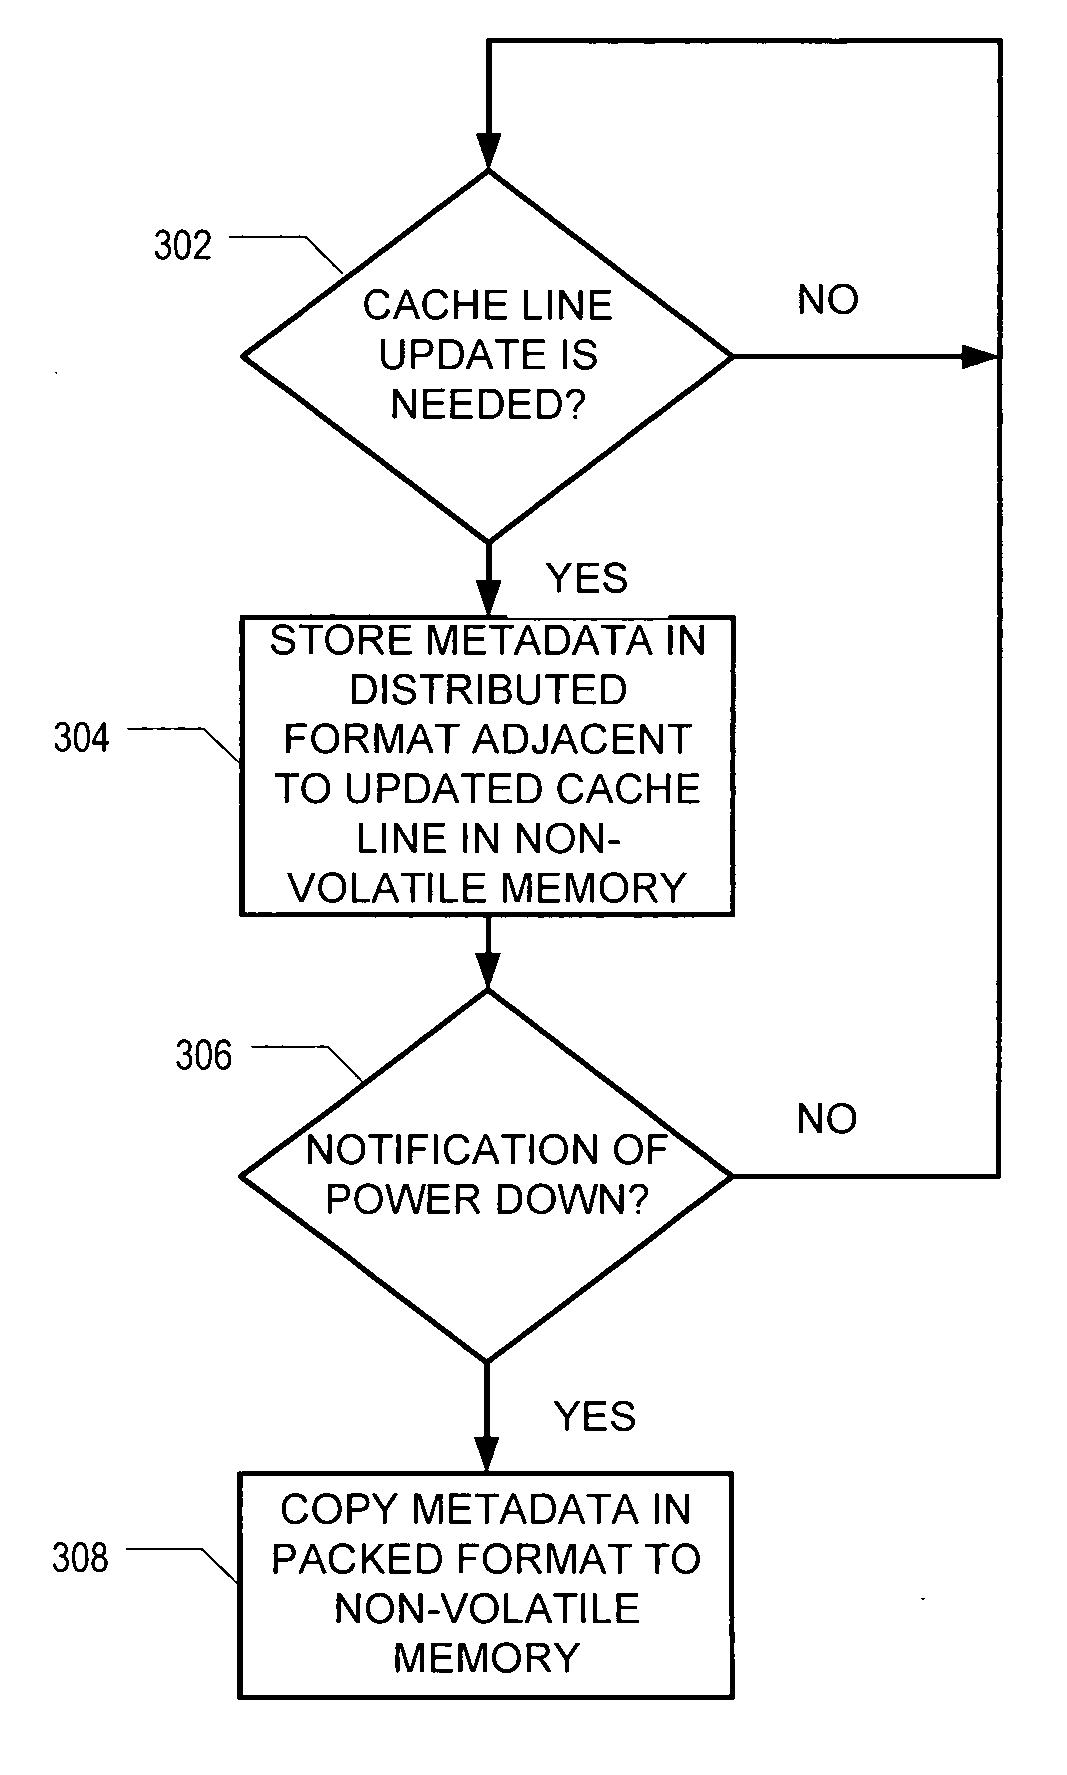 Distributed and packed metadata structure for disk cache